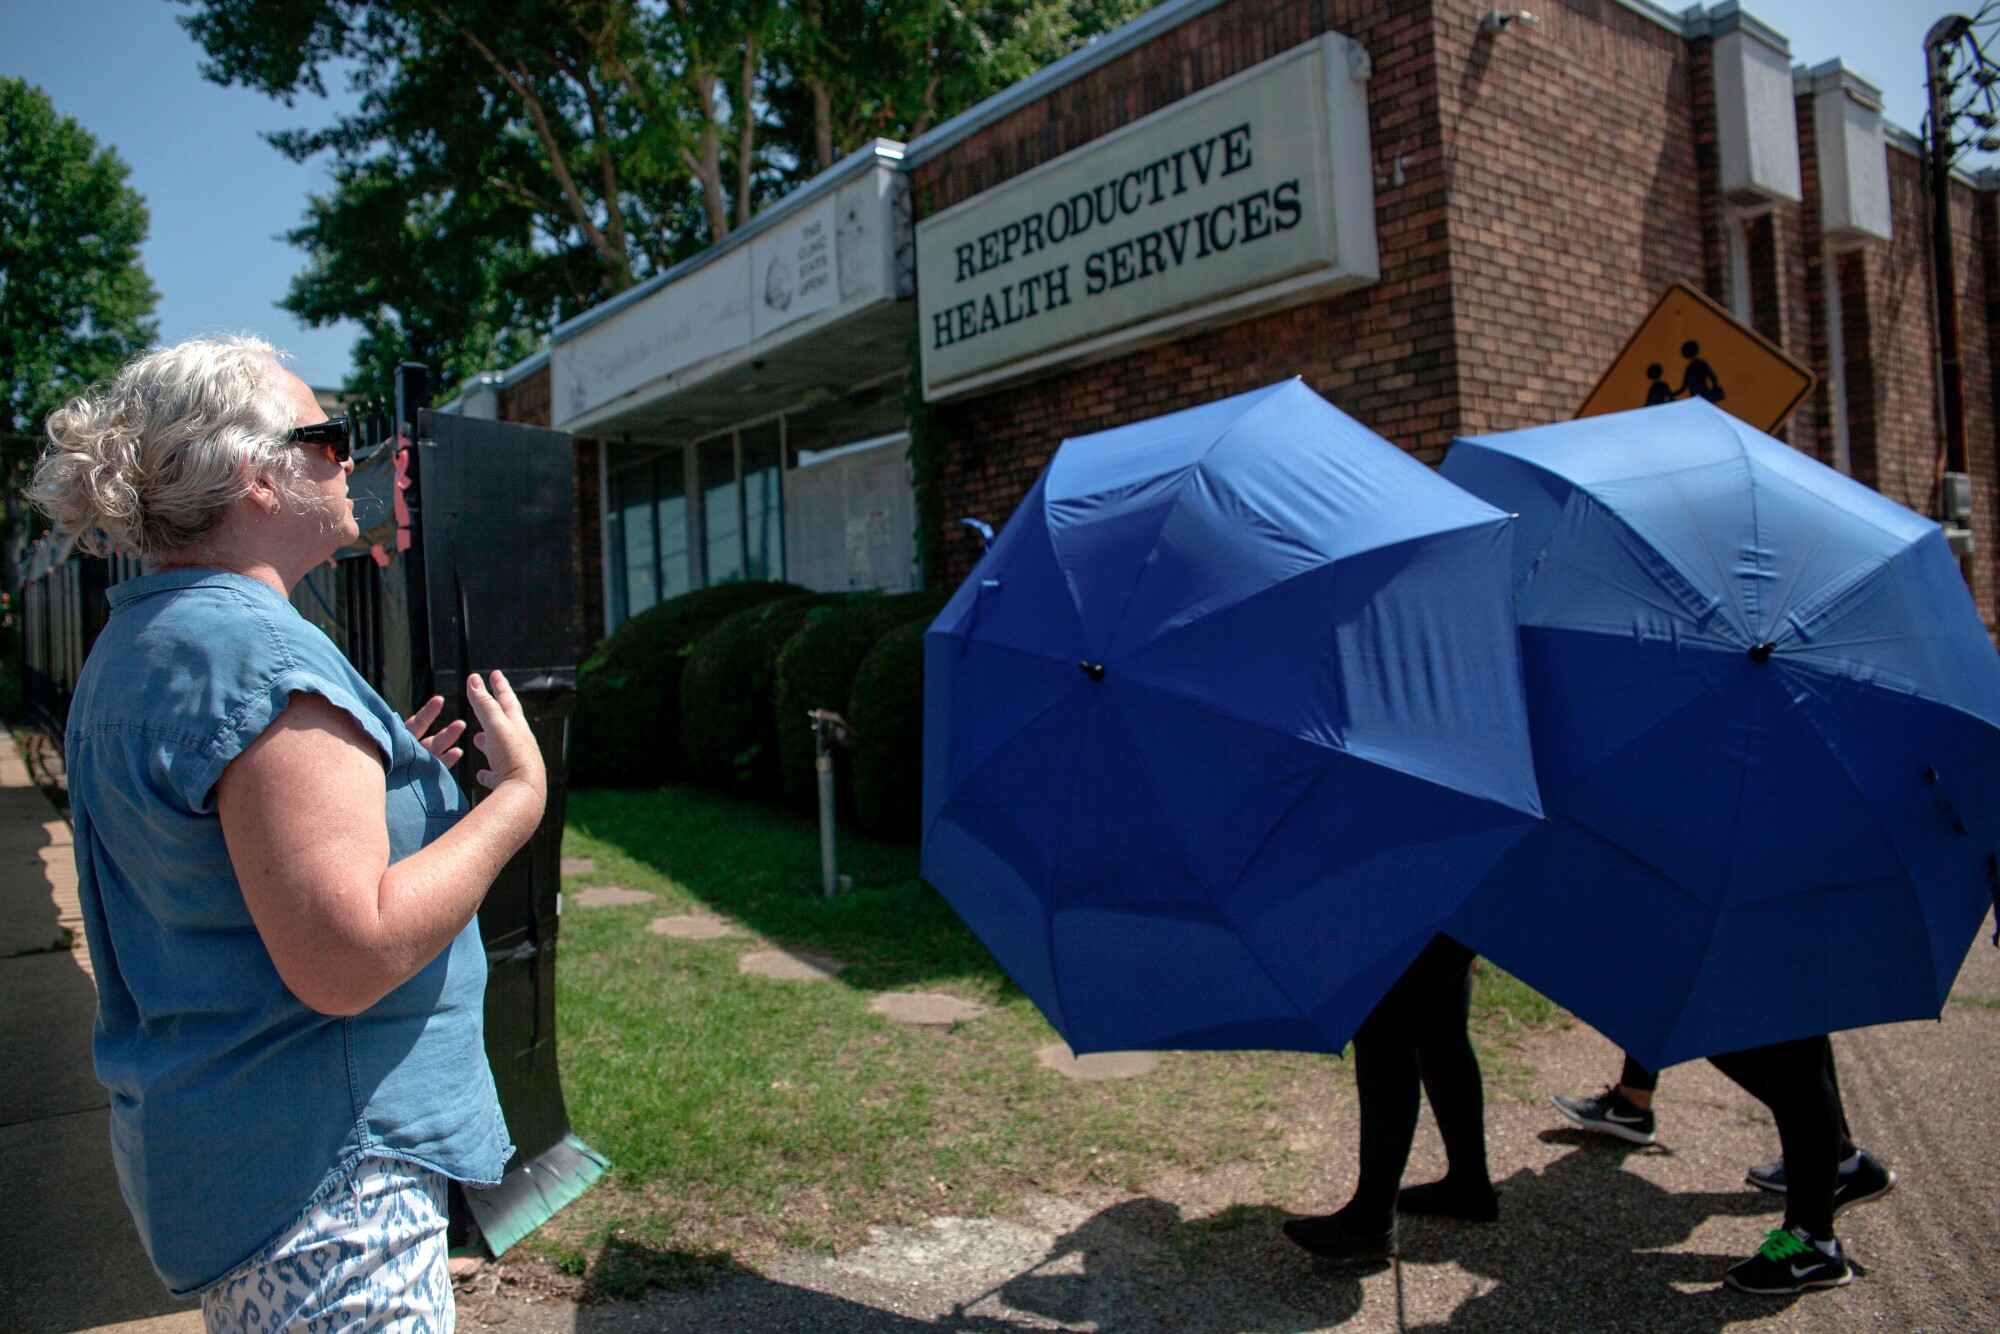 An antiabortion protester shouts as a woman is escorted into the Reproductive Health Services building in Montgomery, Ala.